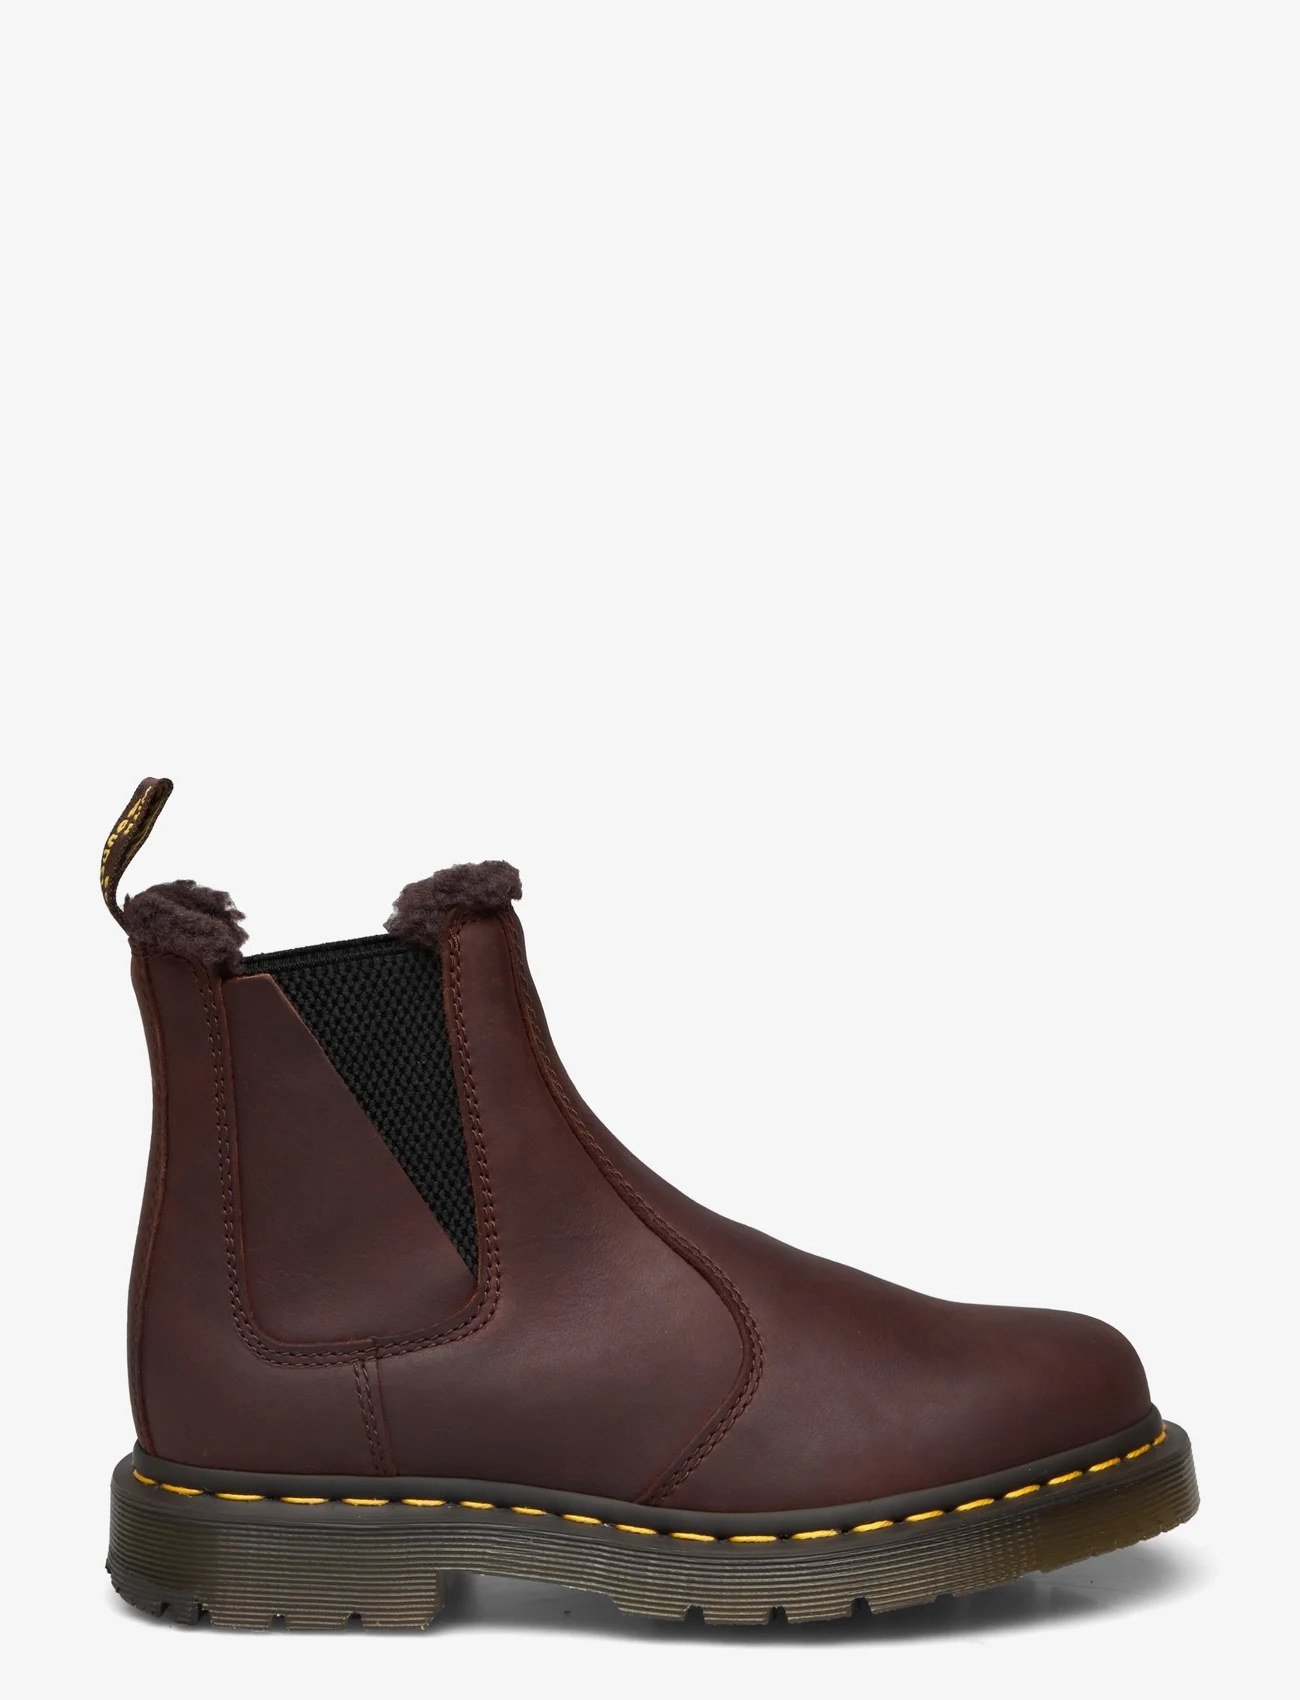 Dr. Martens - 2976 Wg Chocolate Brown Outlaw Wp - flade ankelstøvler - chocolate brown - 1